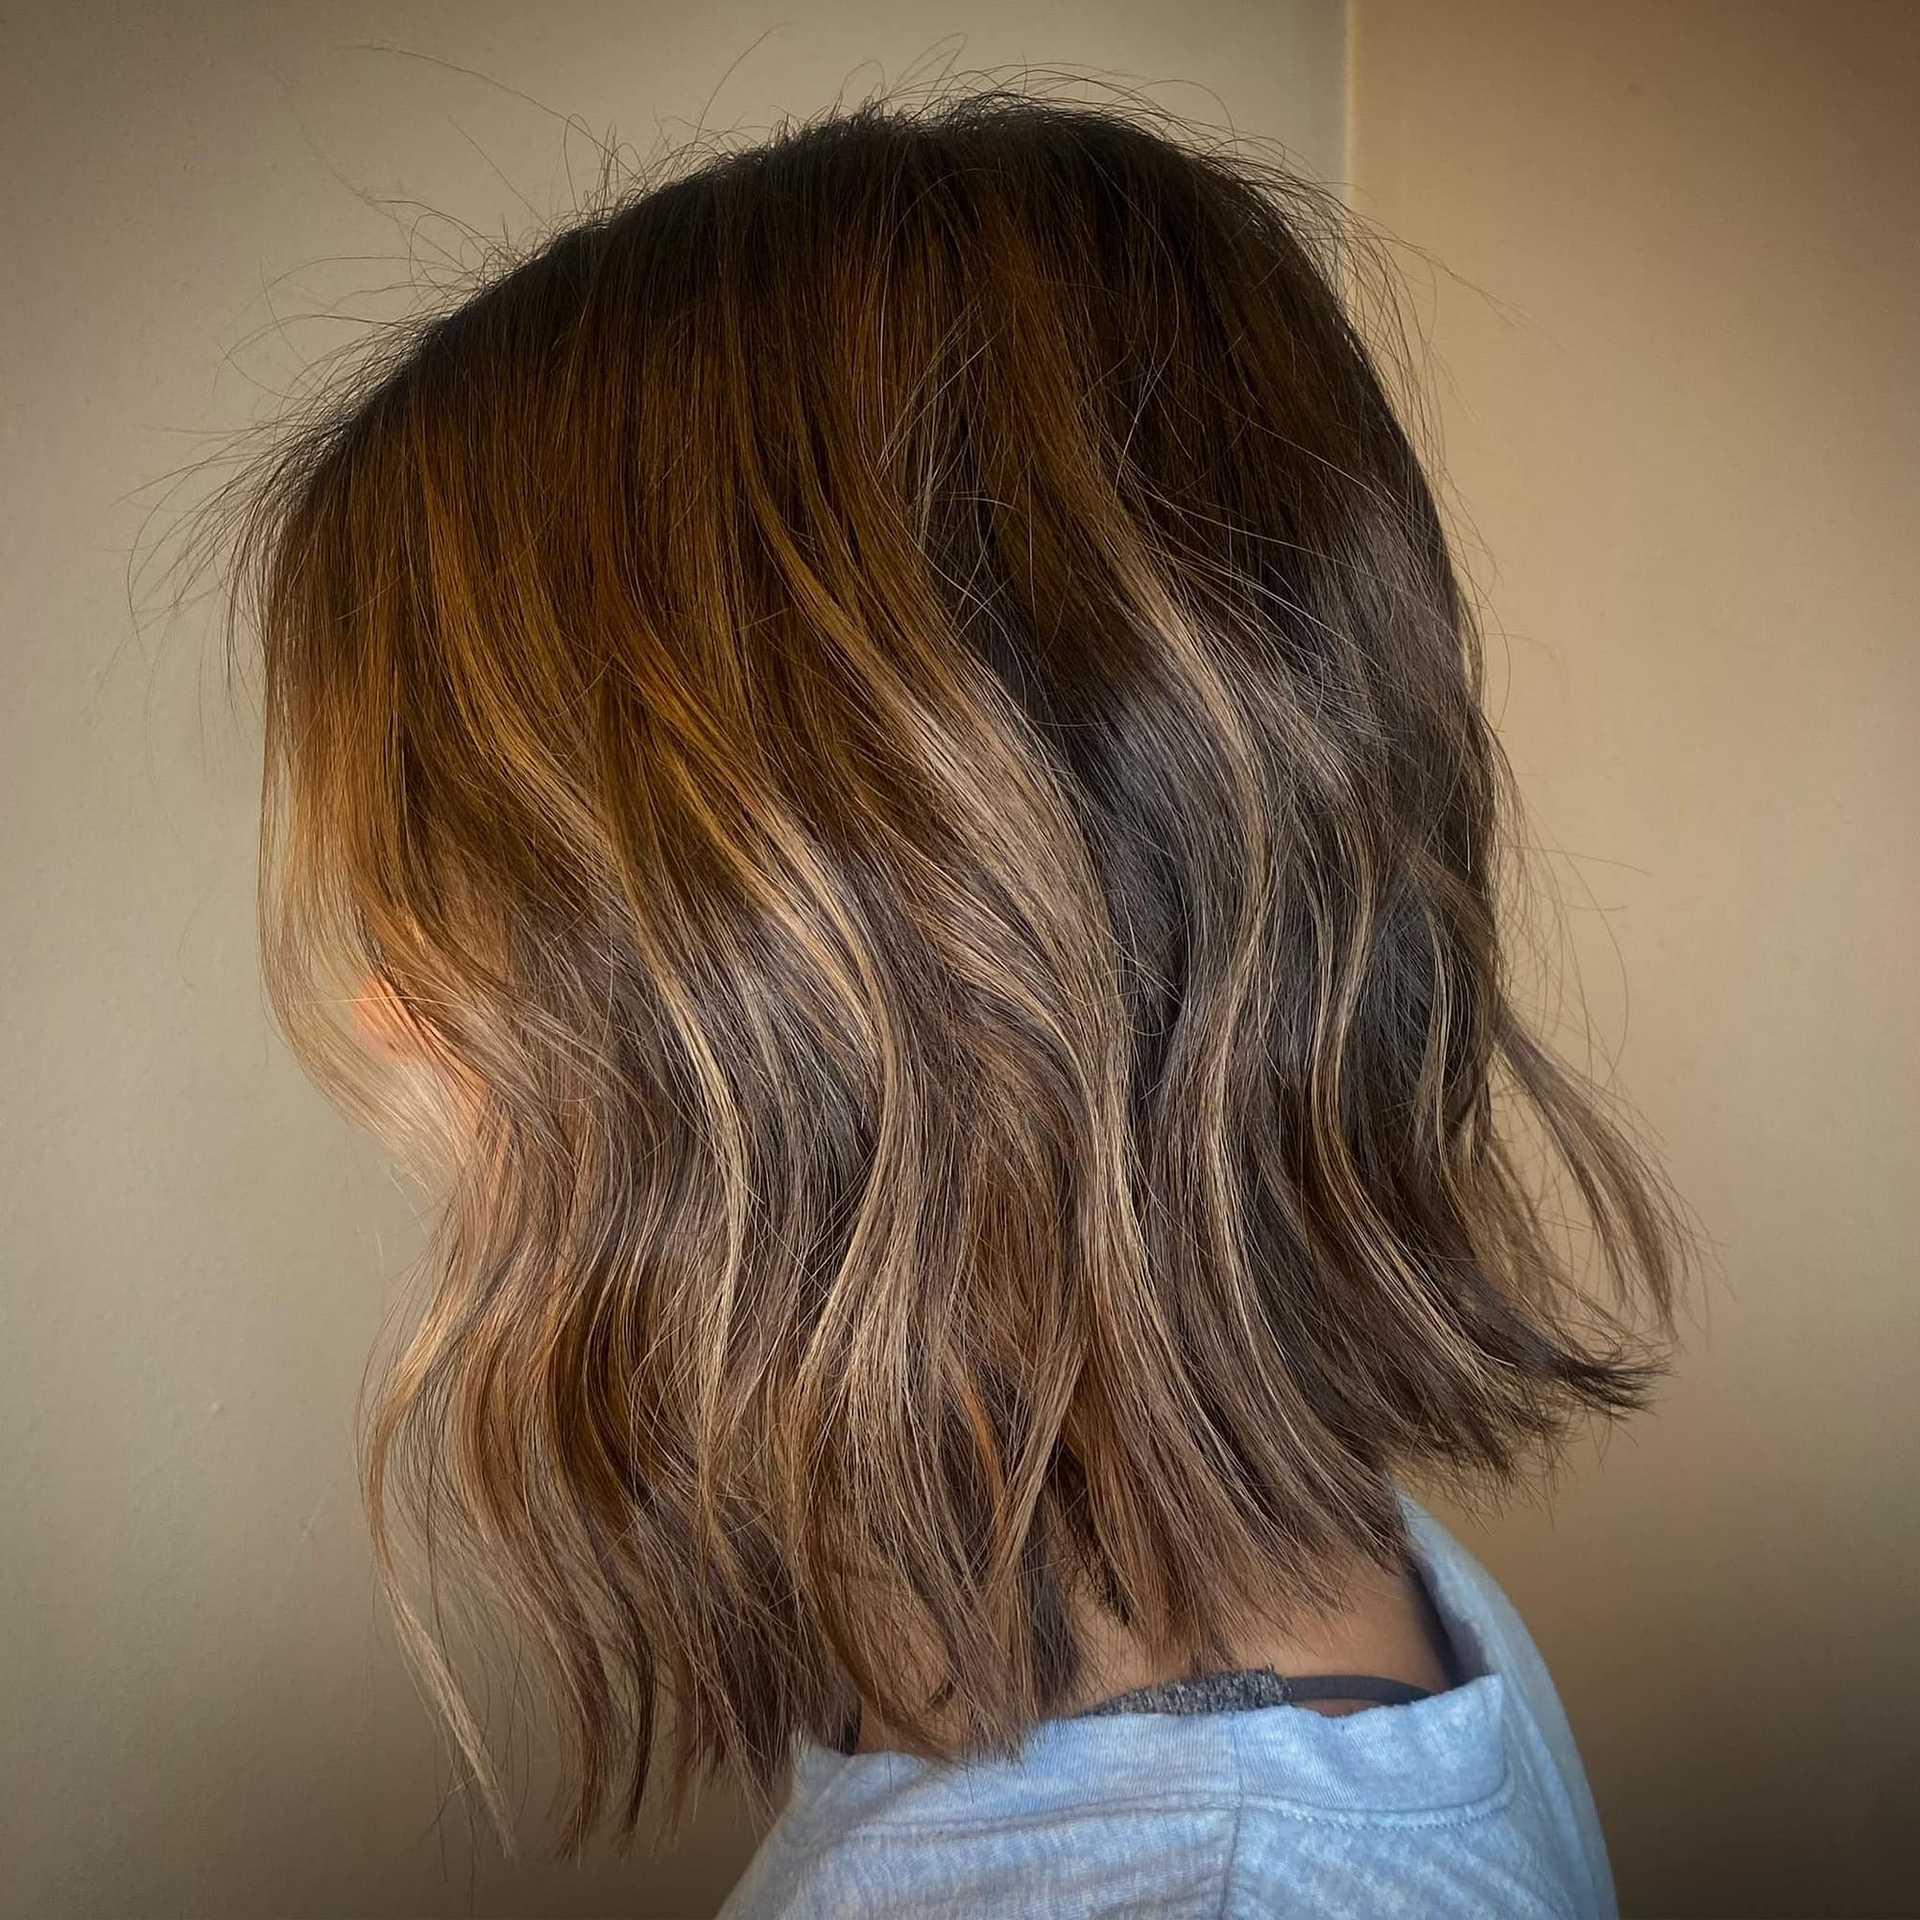 Person with a stylish short wavy brown ombre hairstyle.